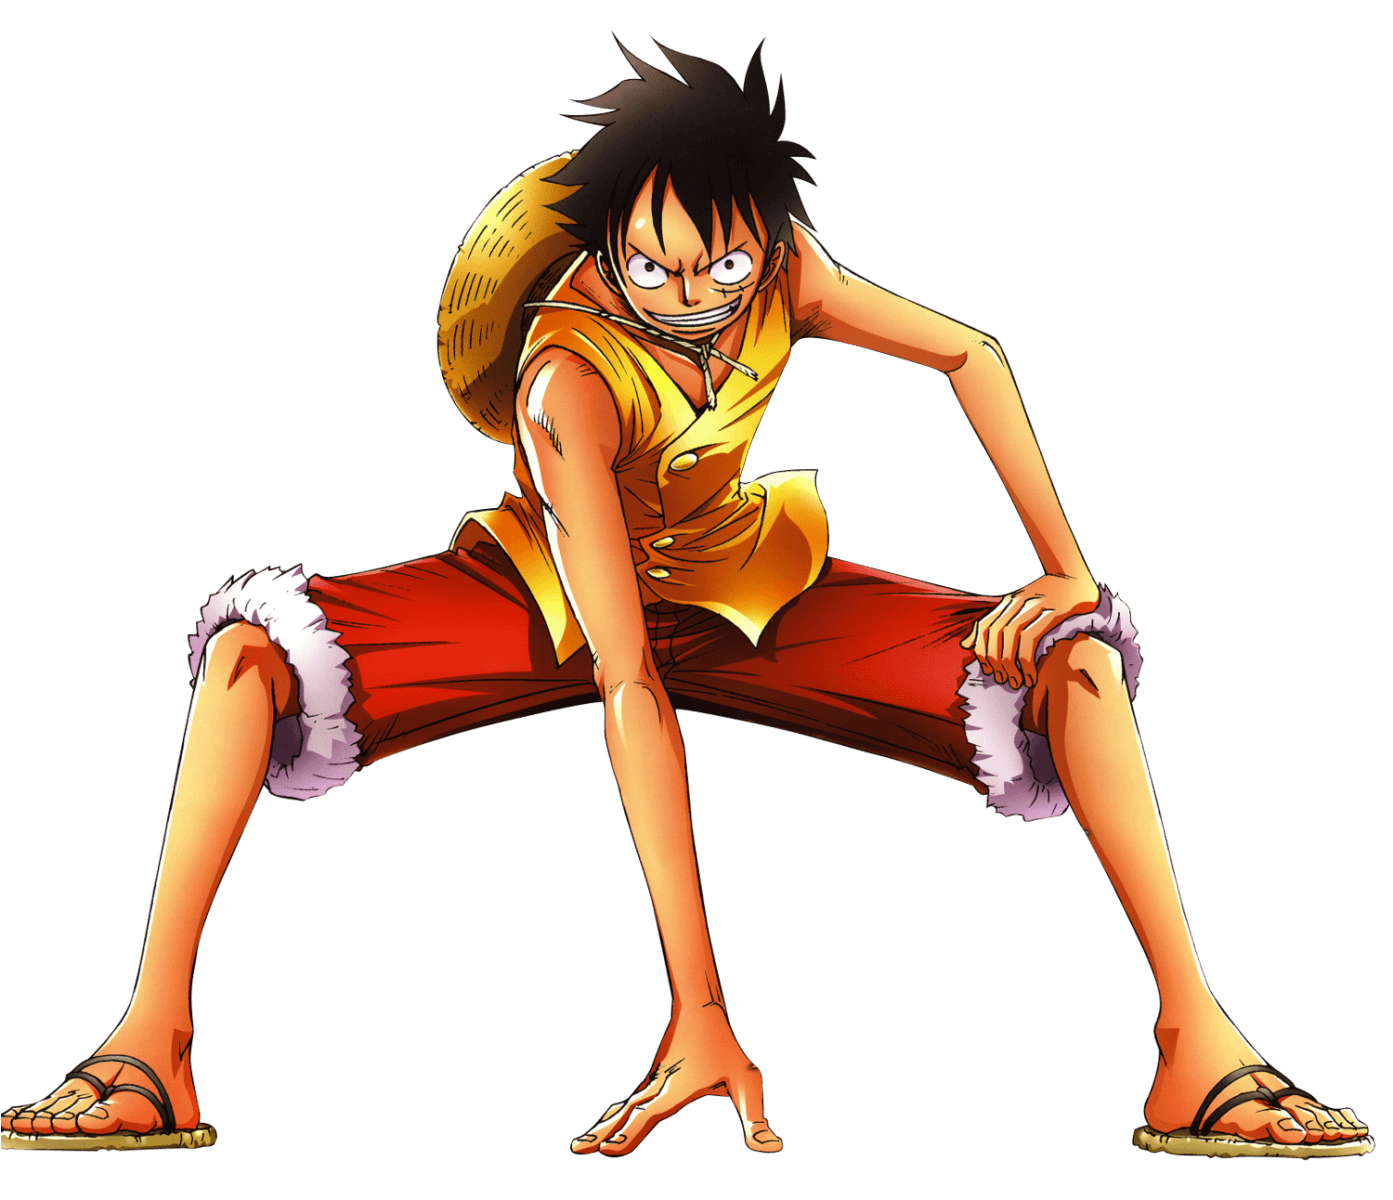 One Piece Luffy Angry Wallpaper. C:. Angry wallpaper